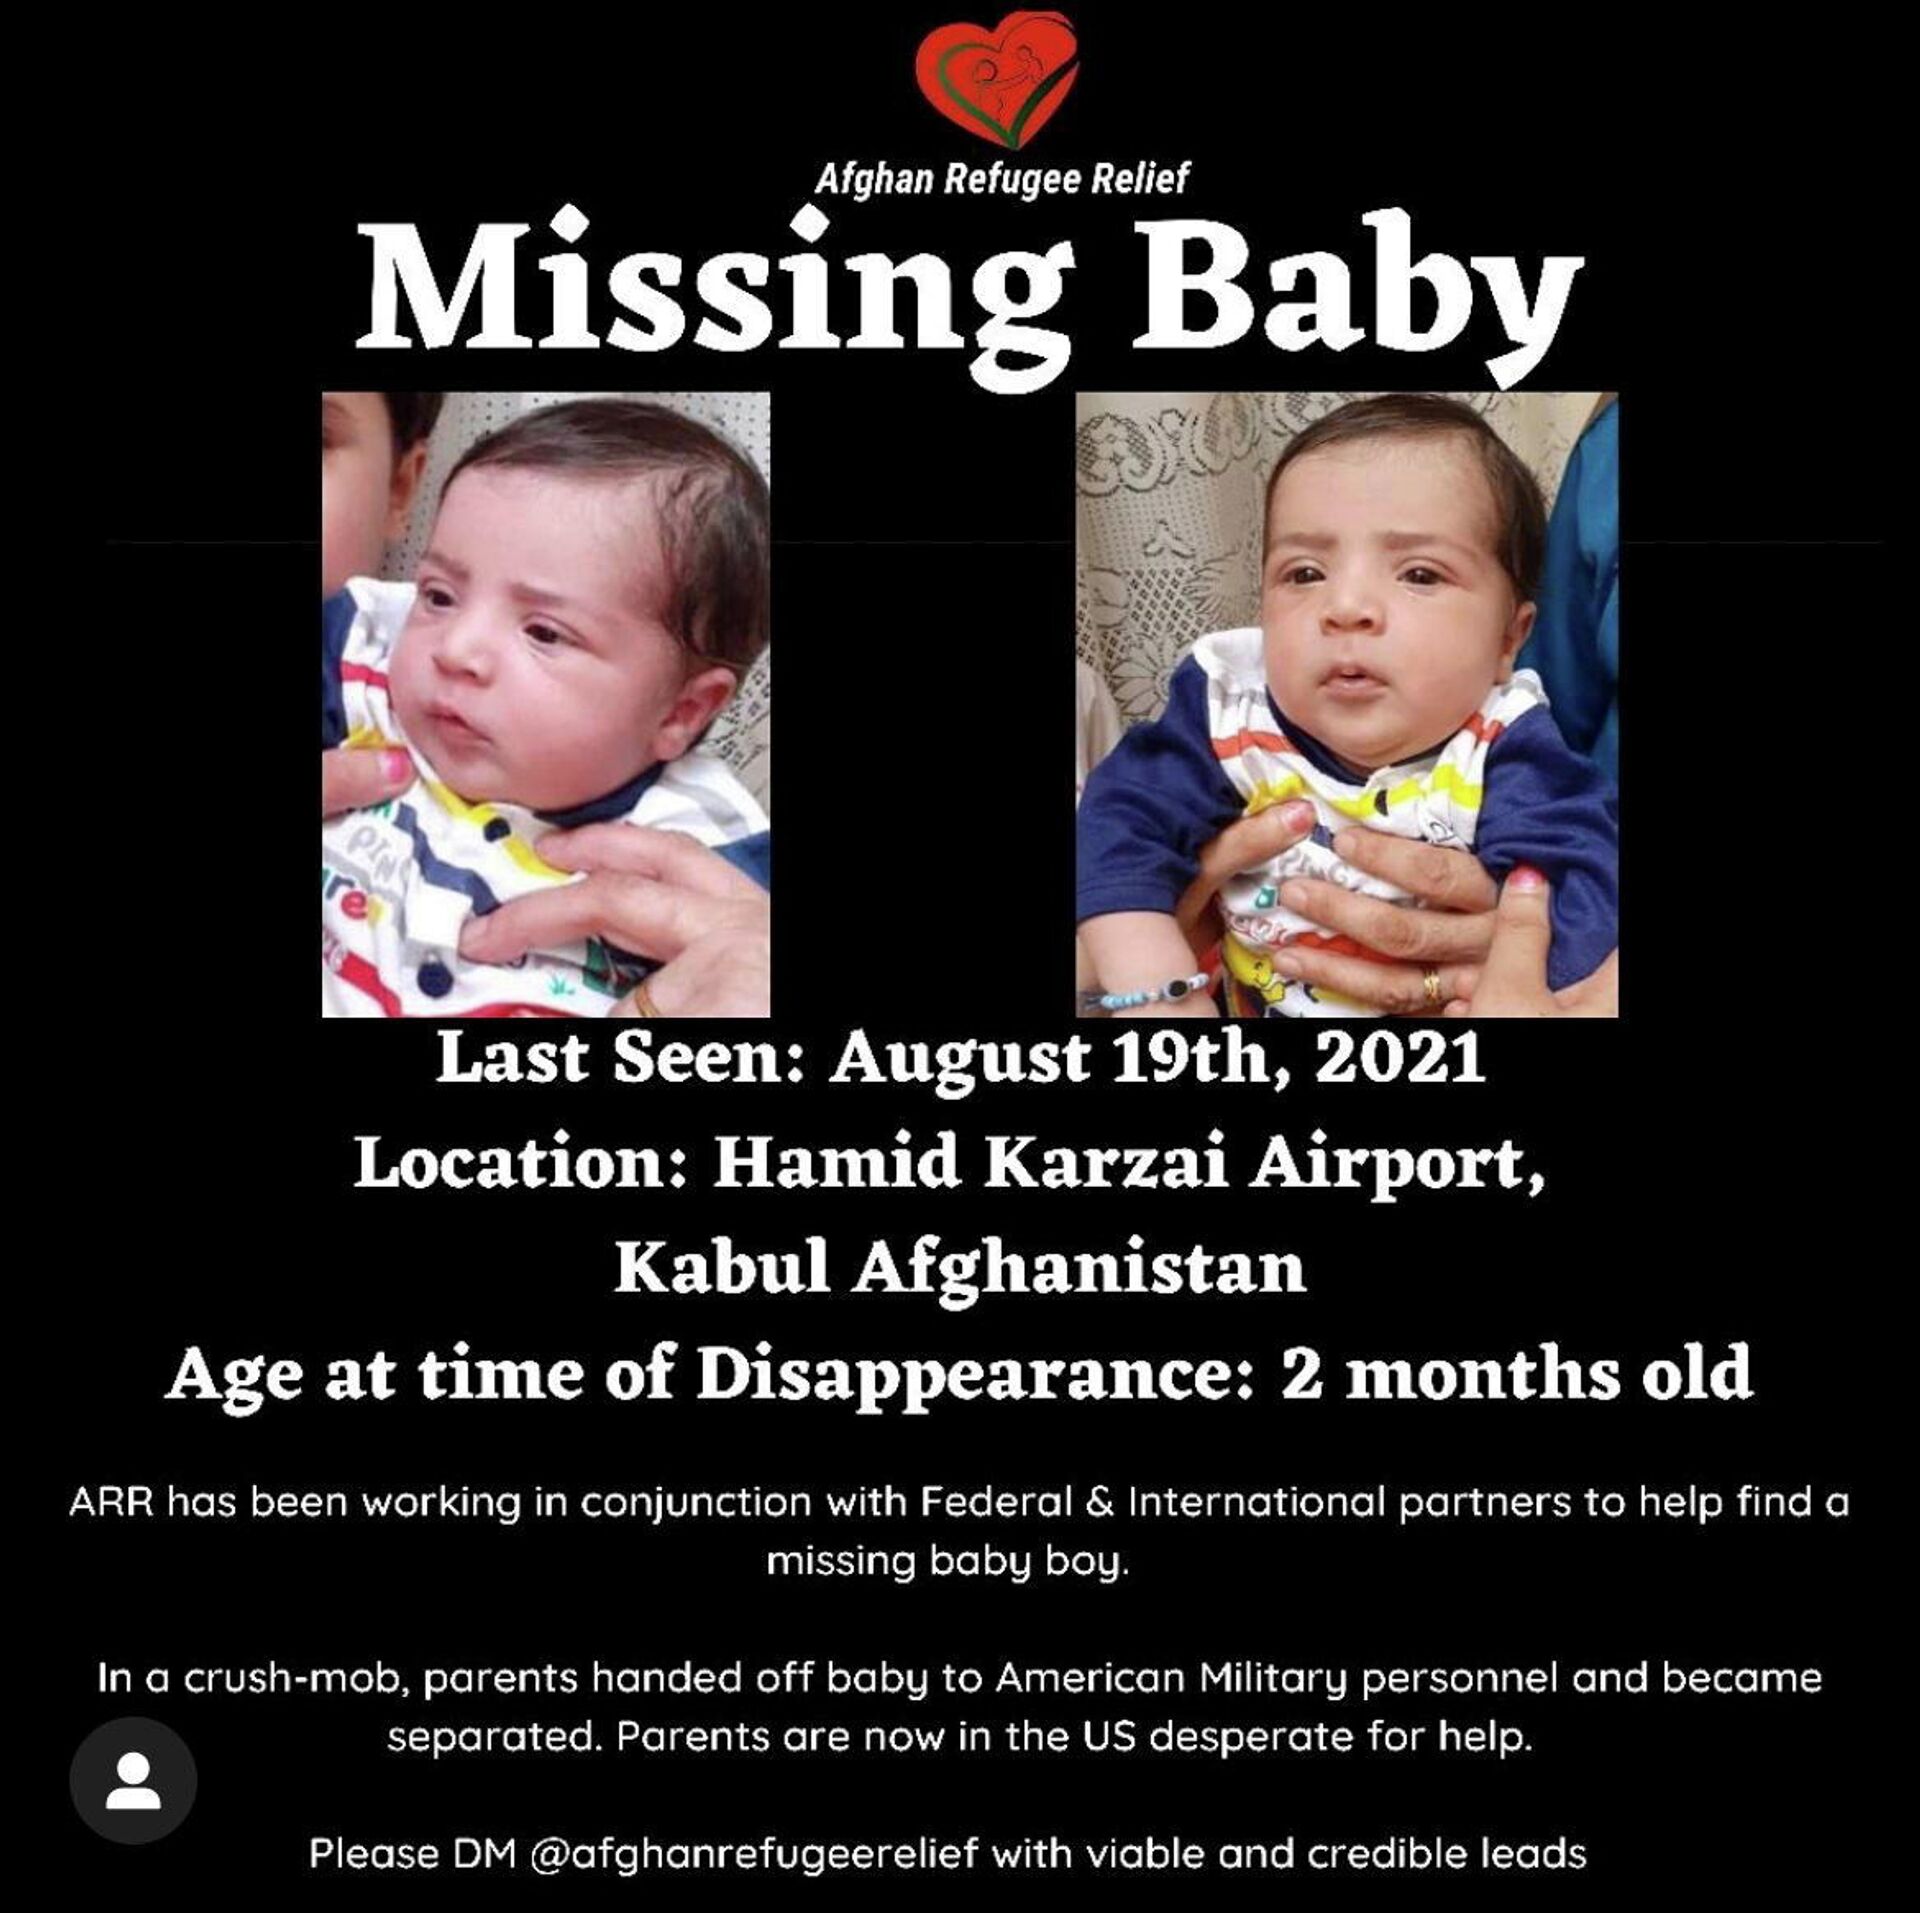 Sohail Ahmadi, around two-months-old, is seen in these handout pictures shown on a poster, taken in August 2021 in Kabul, Afghanistan. Sohail's parents Mirza Ali and his wife Suraya handed him over the fence to a U.S. soldier on August 19, 2021 in the chaos following the U.S. troop withdrawal and hasty evacuation at the Kabul Airport. But by the time the family got to the other side of the fence, the baby was no where to be found.  - Sputnik International, 1920, 06.11.2021